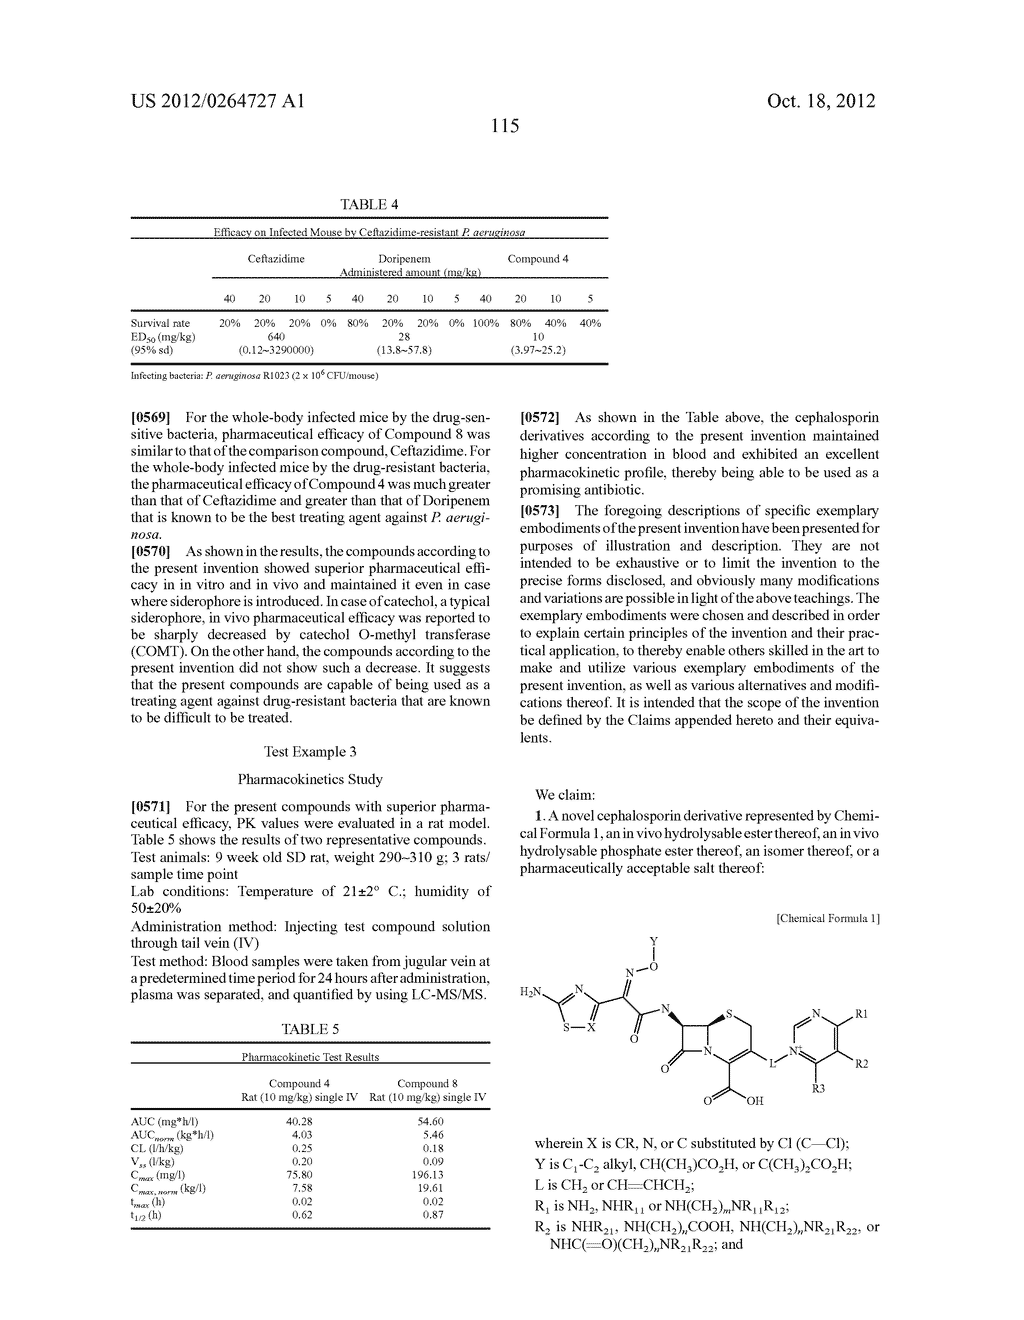 NOVEL CEPHALOSPORIN DERIVATIVES AND PHARMACEUTICAL COMPOSITIONS THEREOF - diagram, schematic, and image 118